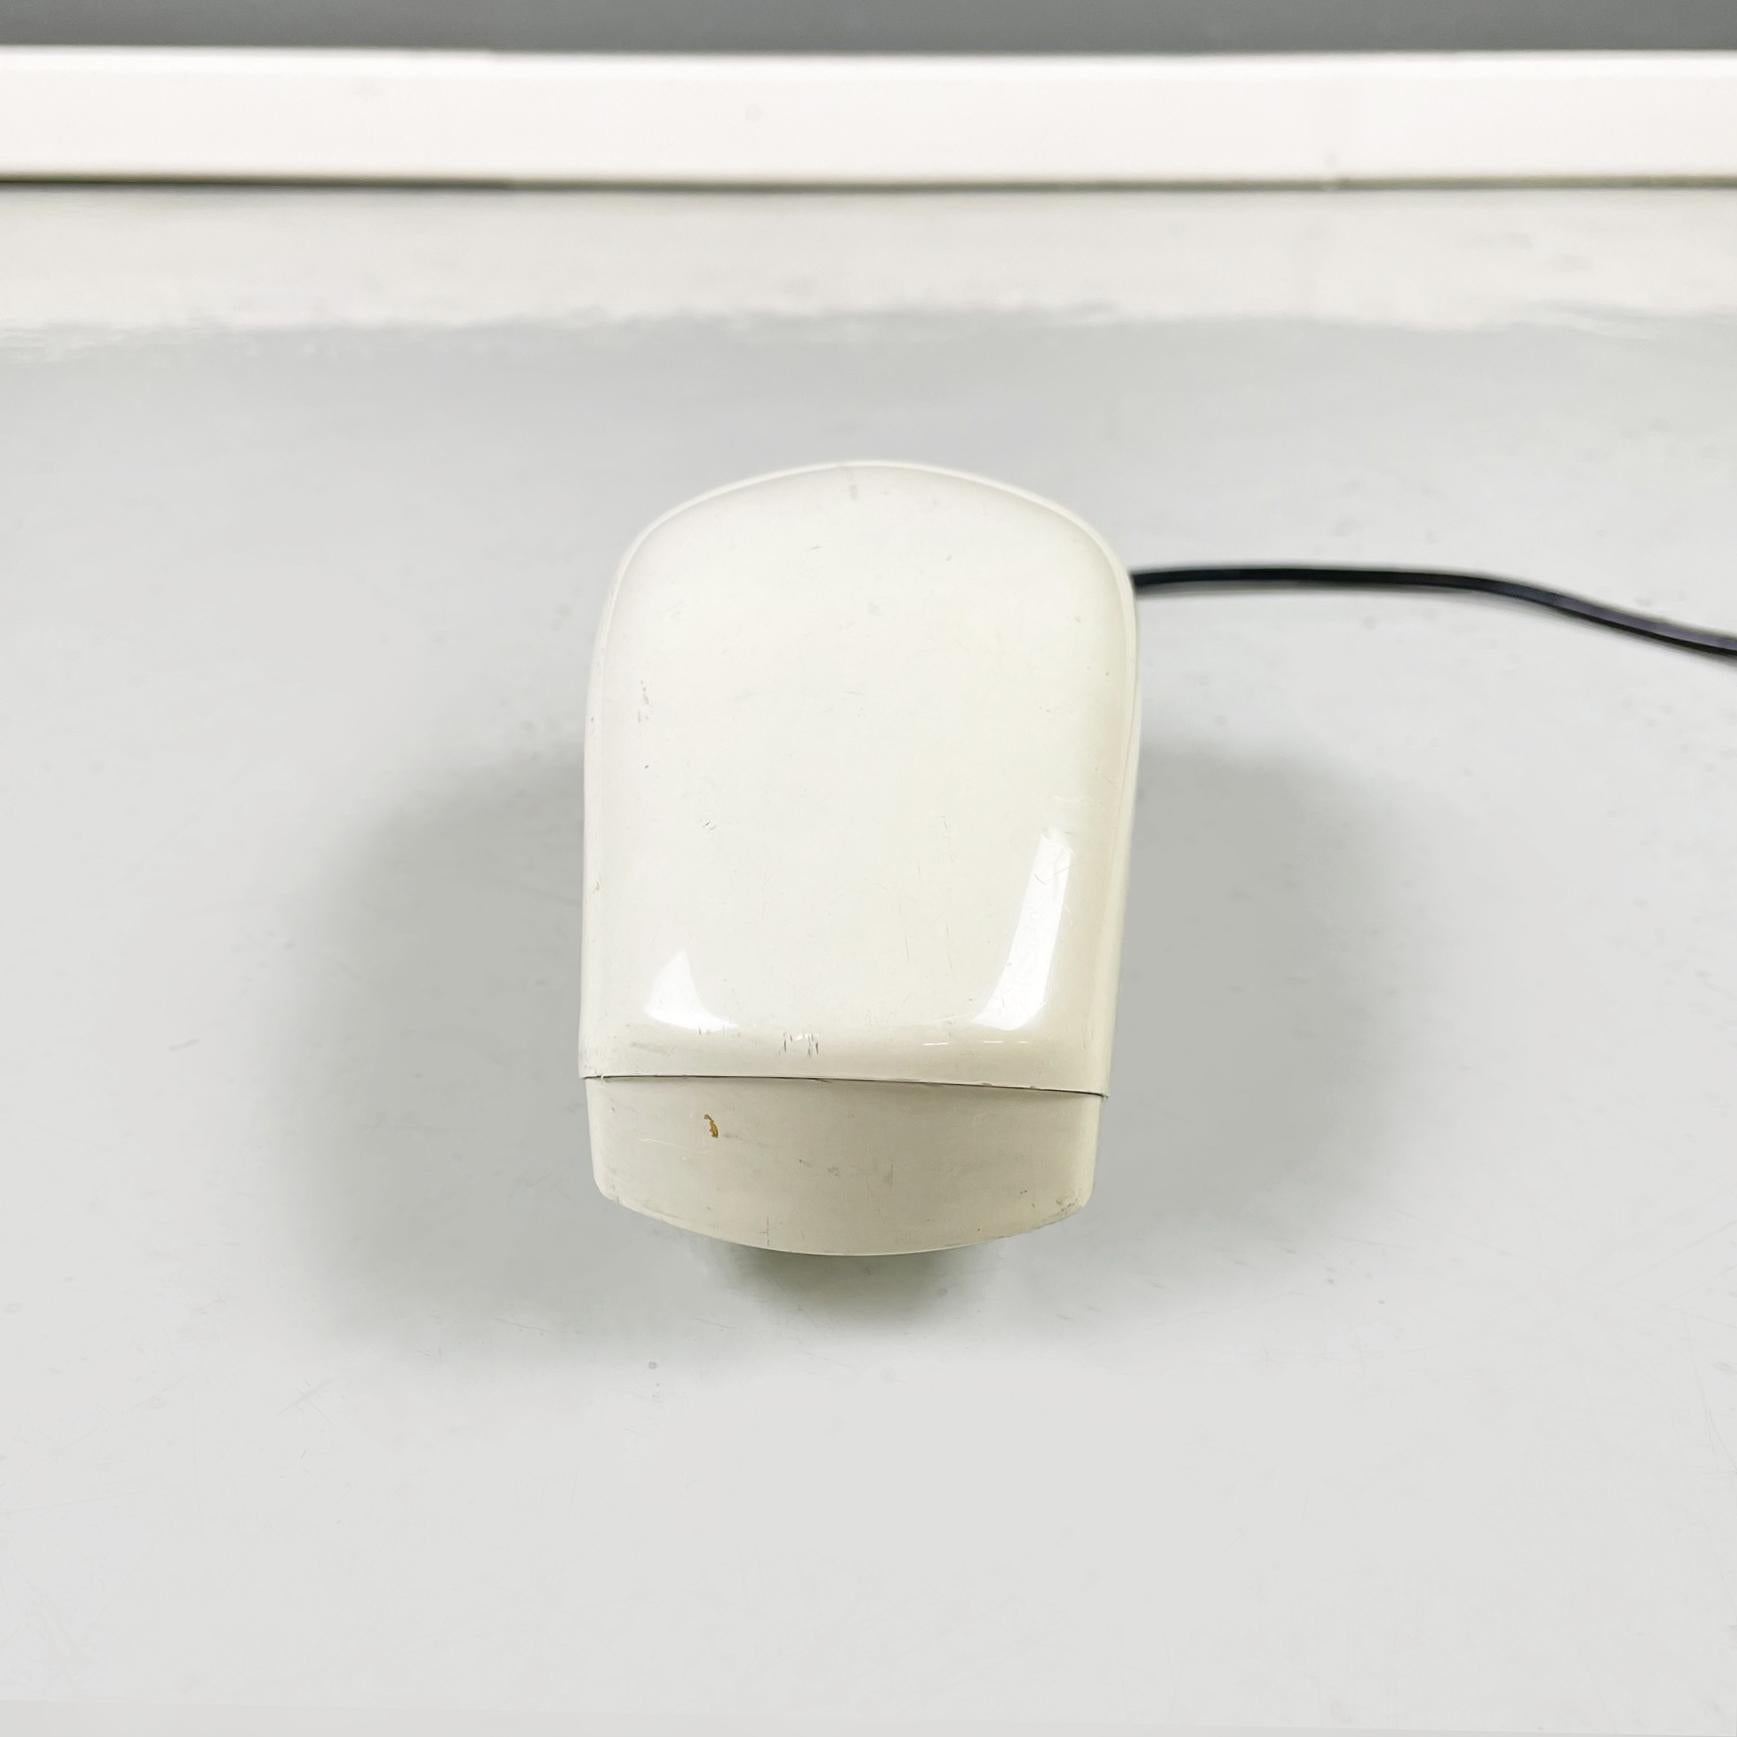 Mid-20th Century German Modern White Telephone Mod. Grillo by Zanuso Sapper for Siemens, 1960s For Sale